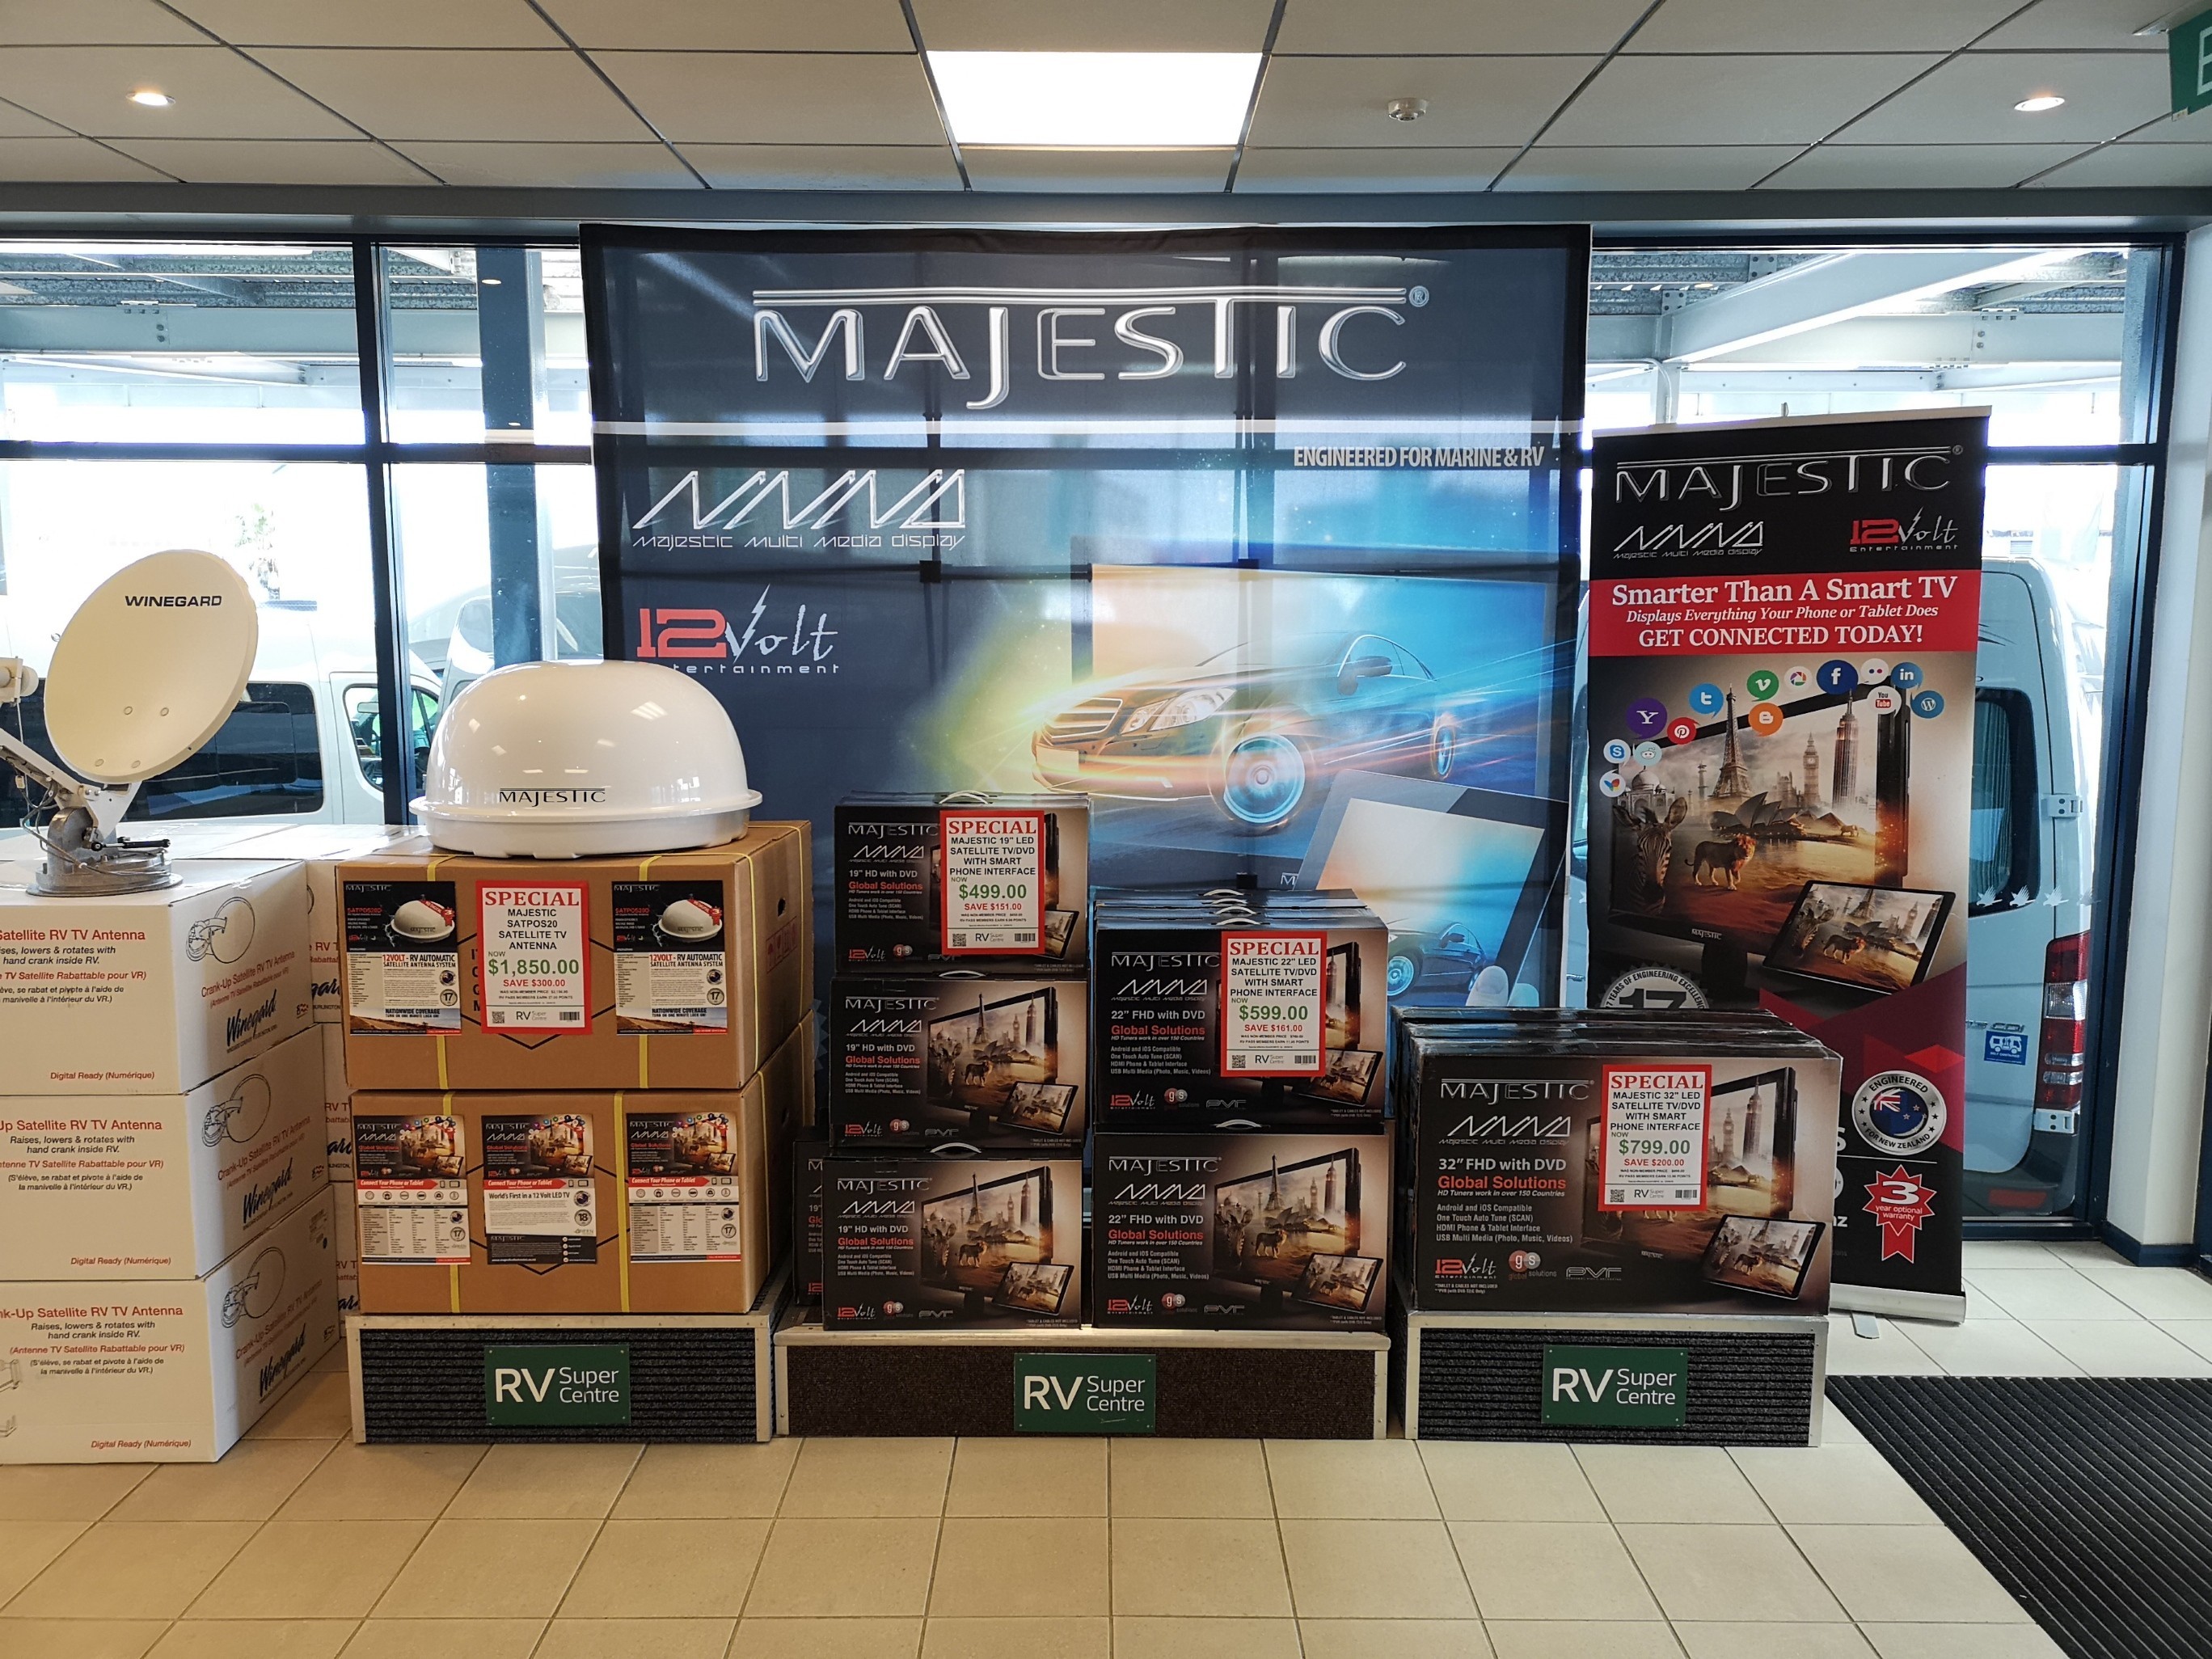 RV Super Centre is holding a huge September Sale with Savings on Majestic Products.